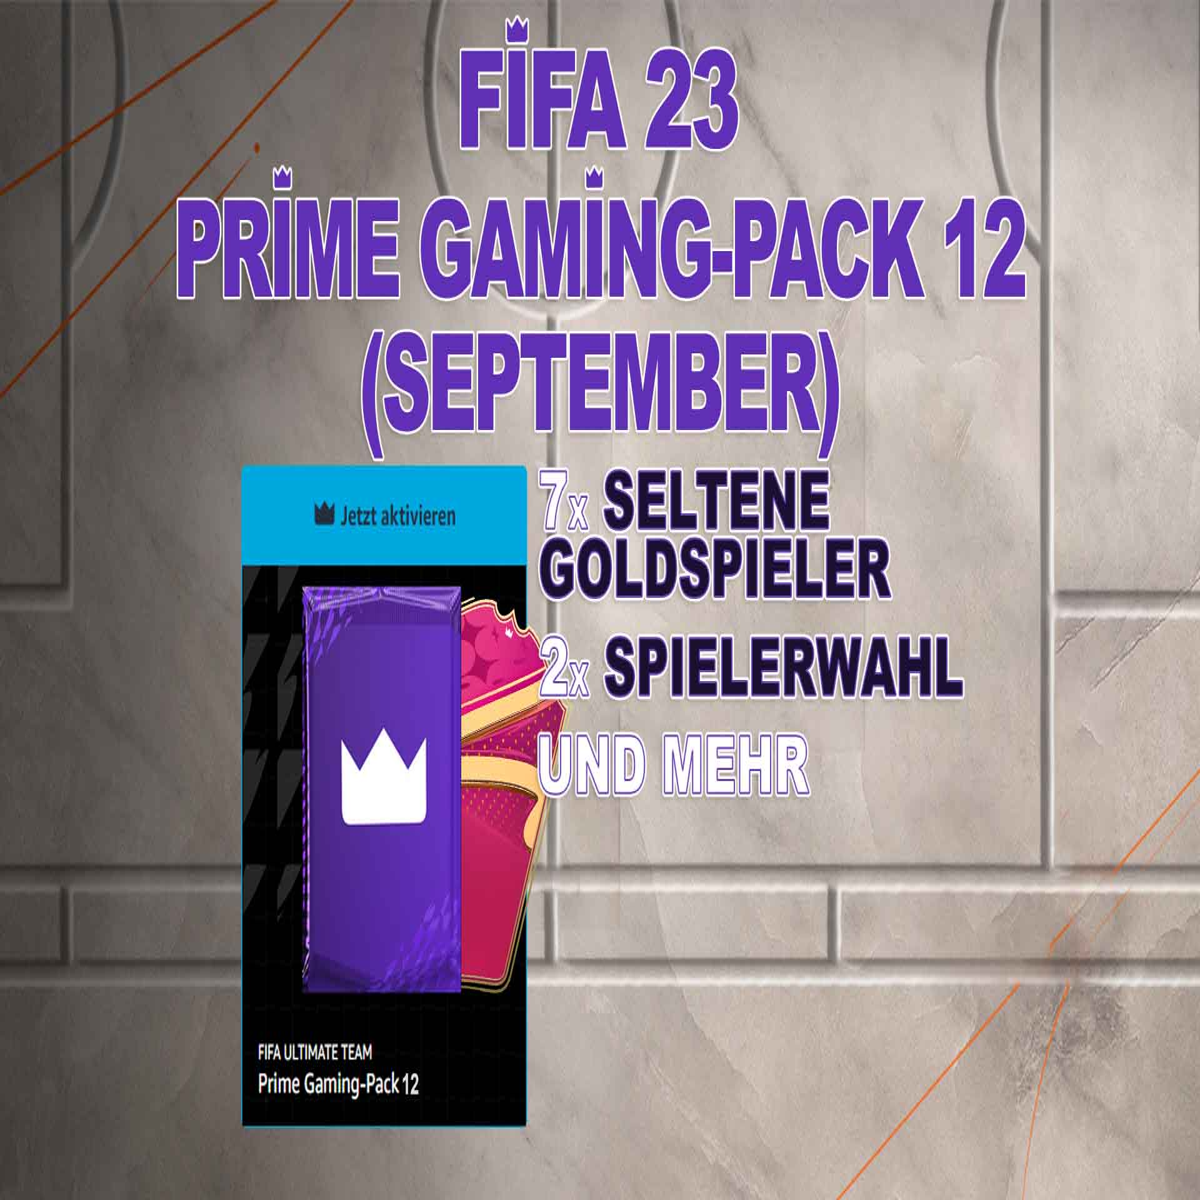 FIFA 22 ULTIMATE TEAM PRIME GAMING PACK #4 - Claim Your Loot - PS4